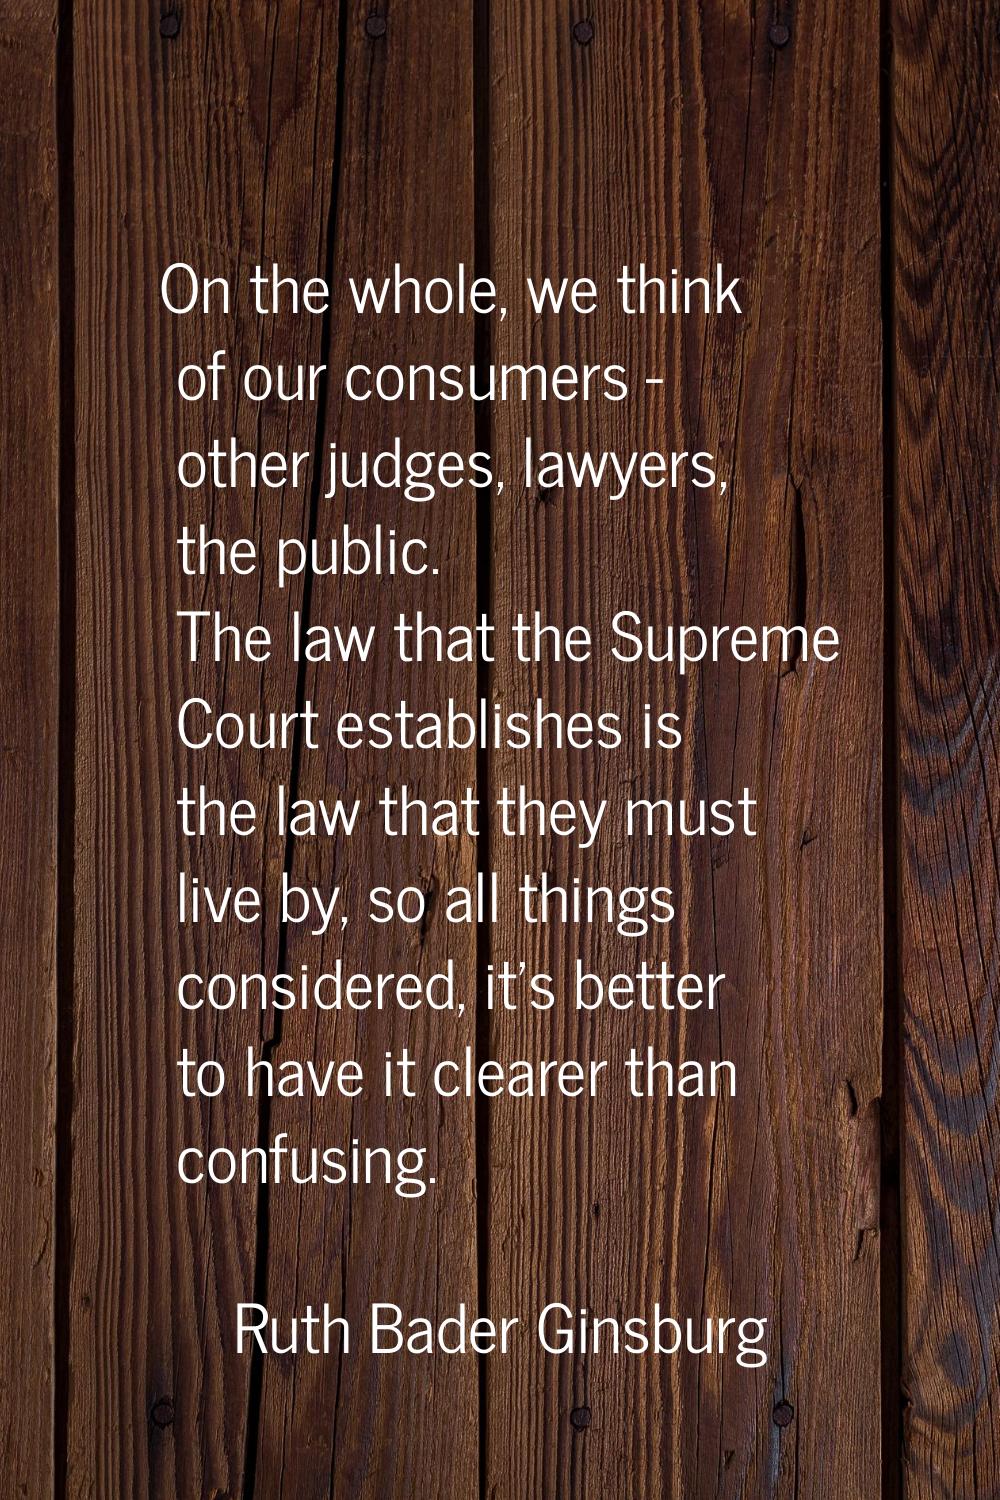 On the whole, we think of our consumers - other judges, lawyers, the public. The law that the Supre